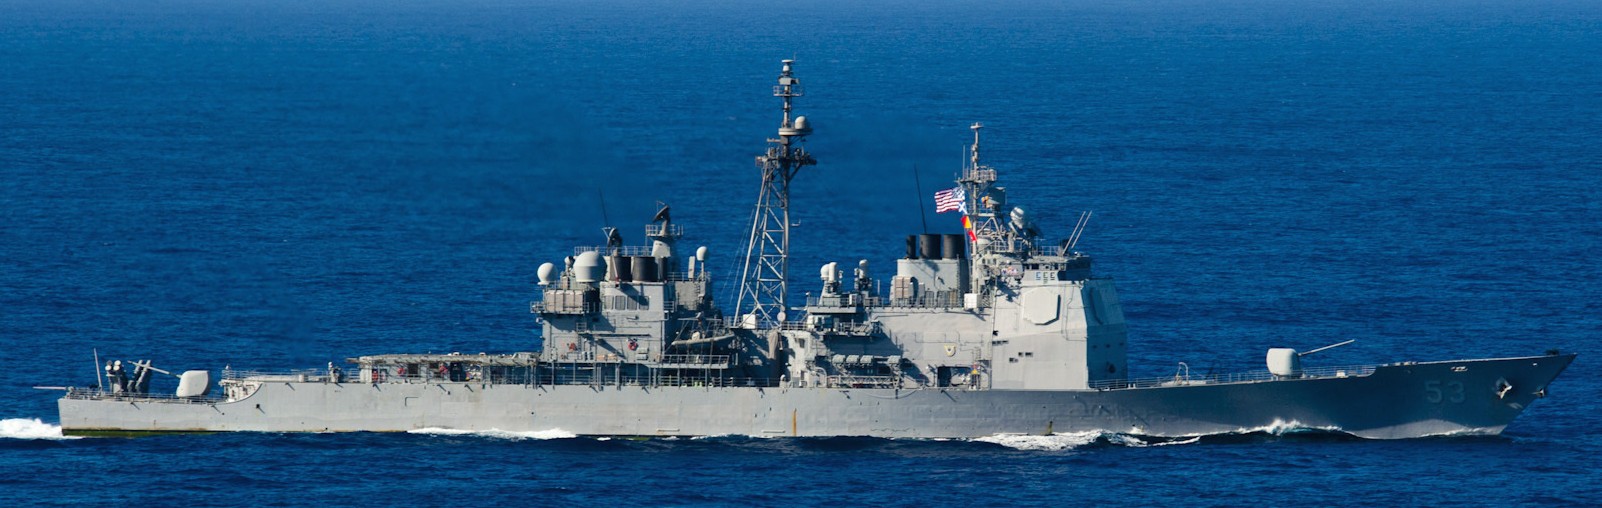 cg-53 uss mobile bay ticonderoga class guided missile cruiser aegis us navy 51